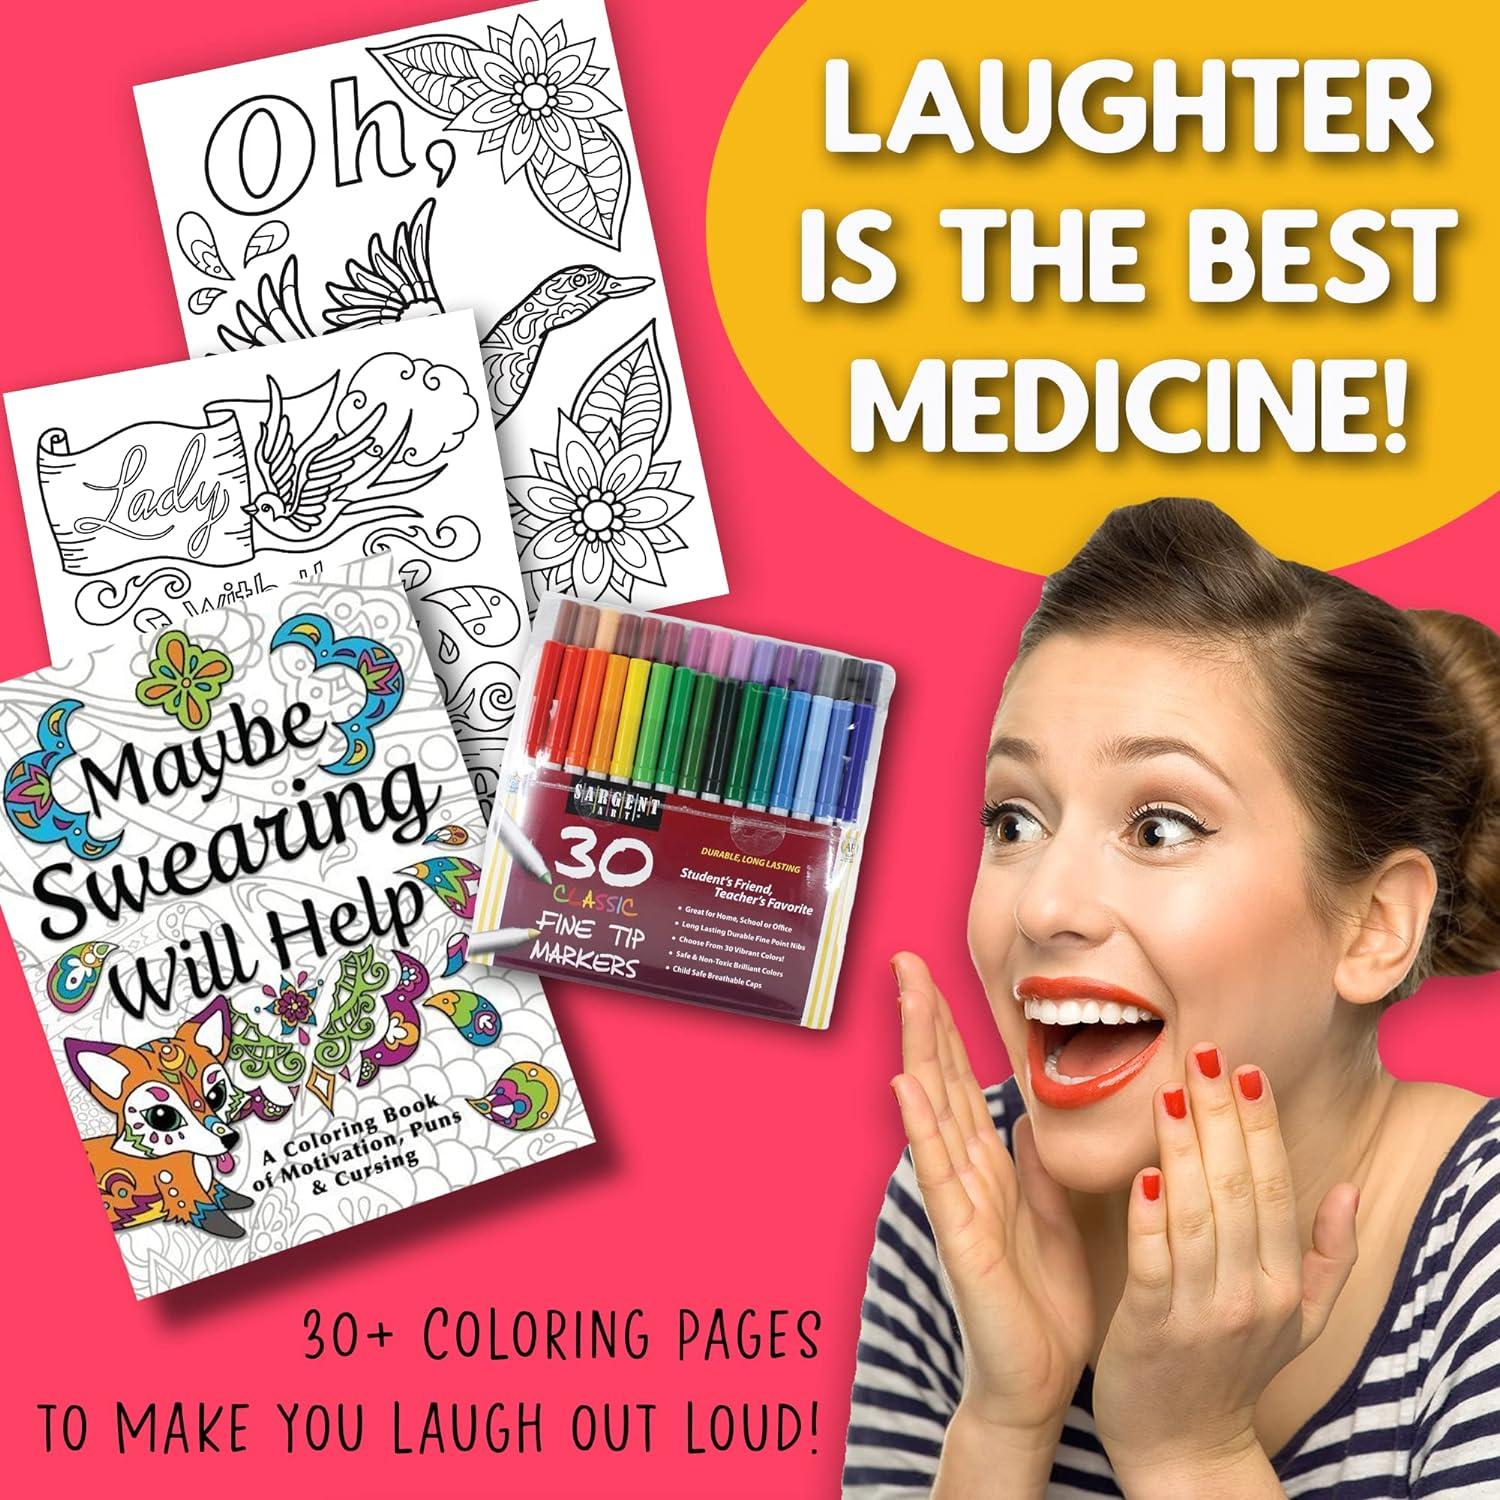 Maybe Swearing Will Help Adult Coloring Book Set - Coloring Books for Adults  Relaxation with 30 Markers in a Case - Motivational Swear Word Anxiety  Relief - Color Cuss & Laugh Your